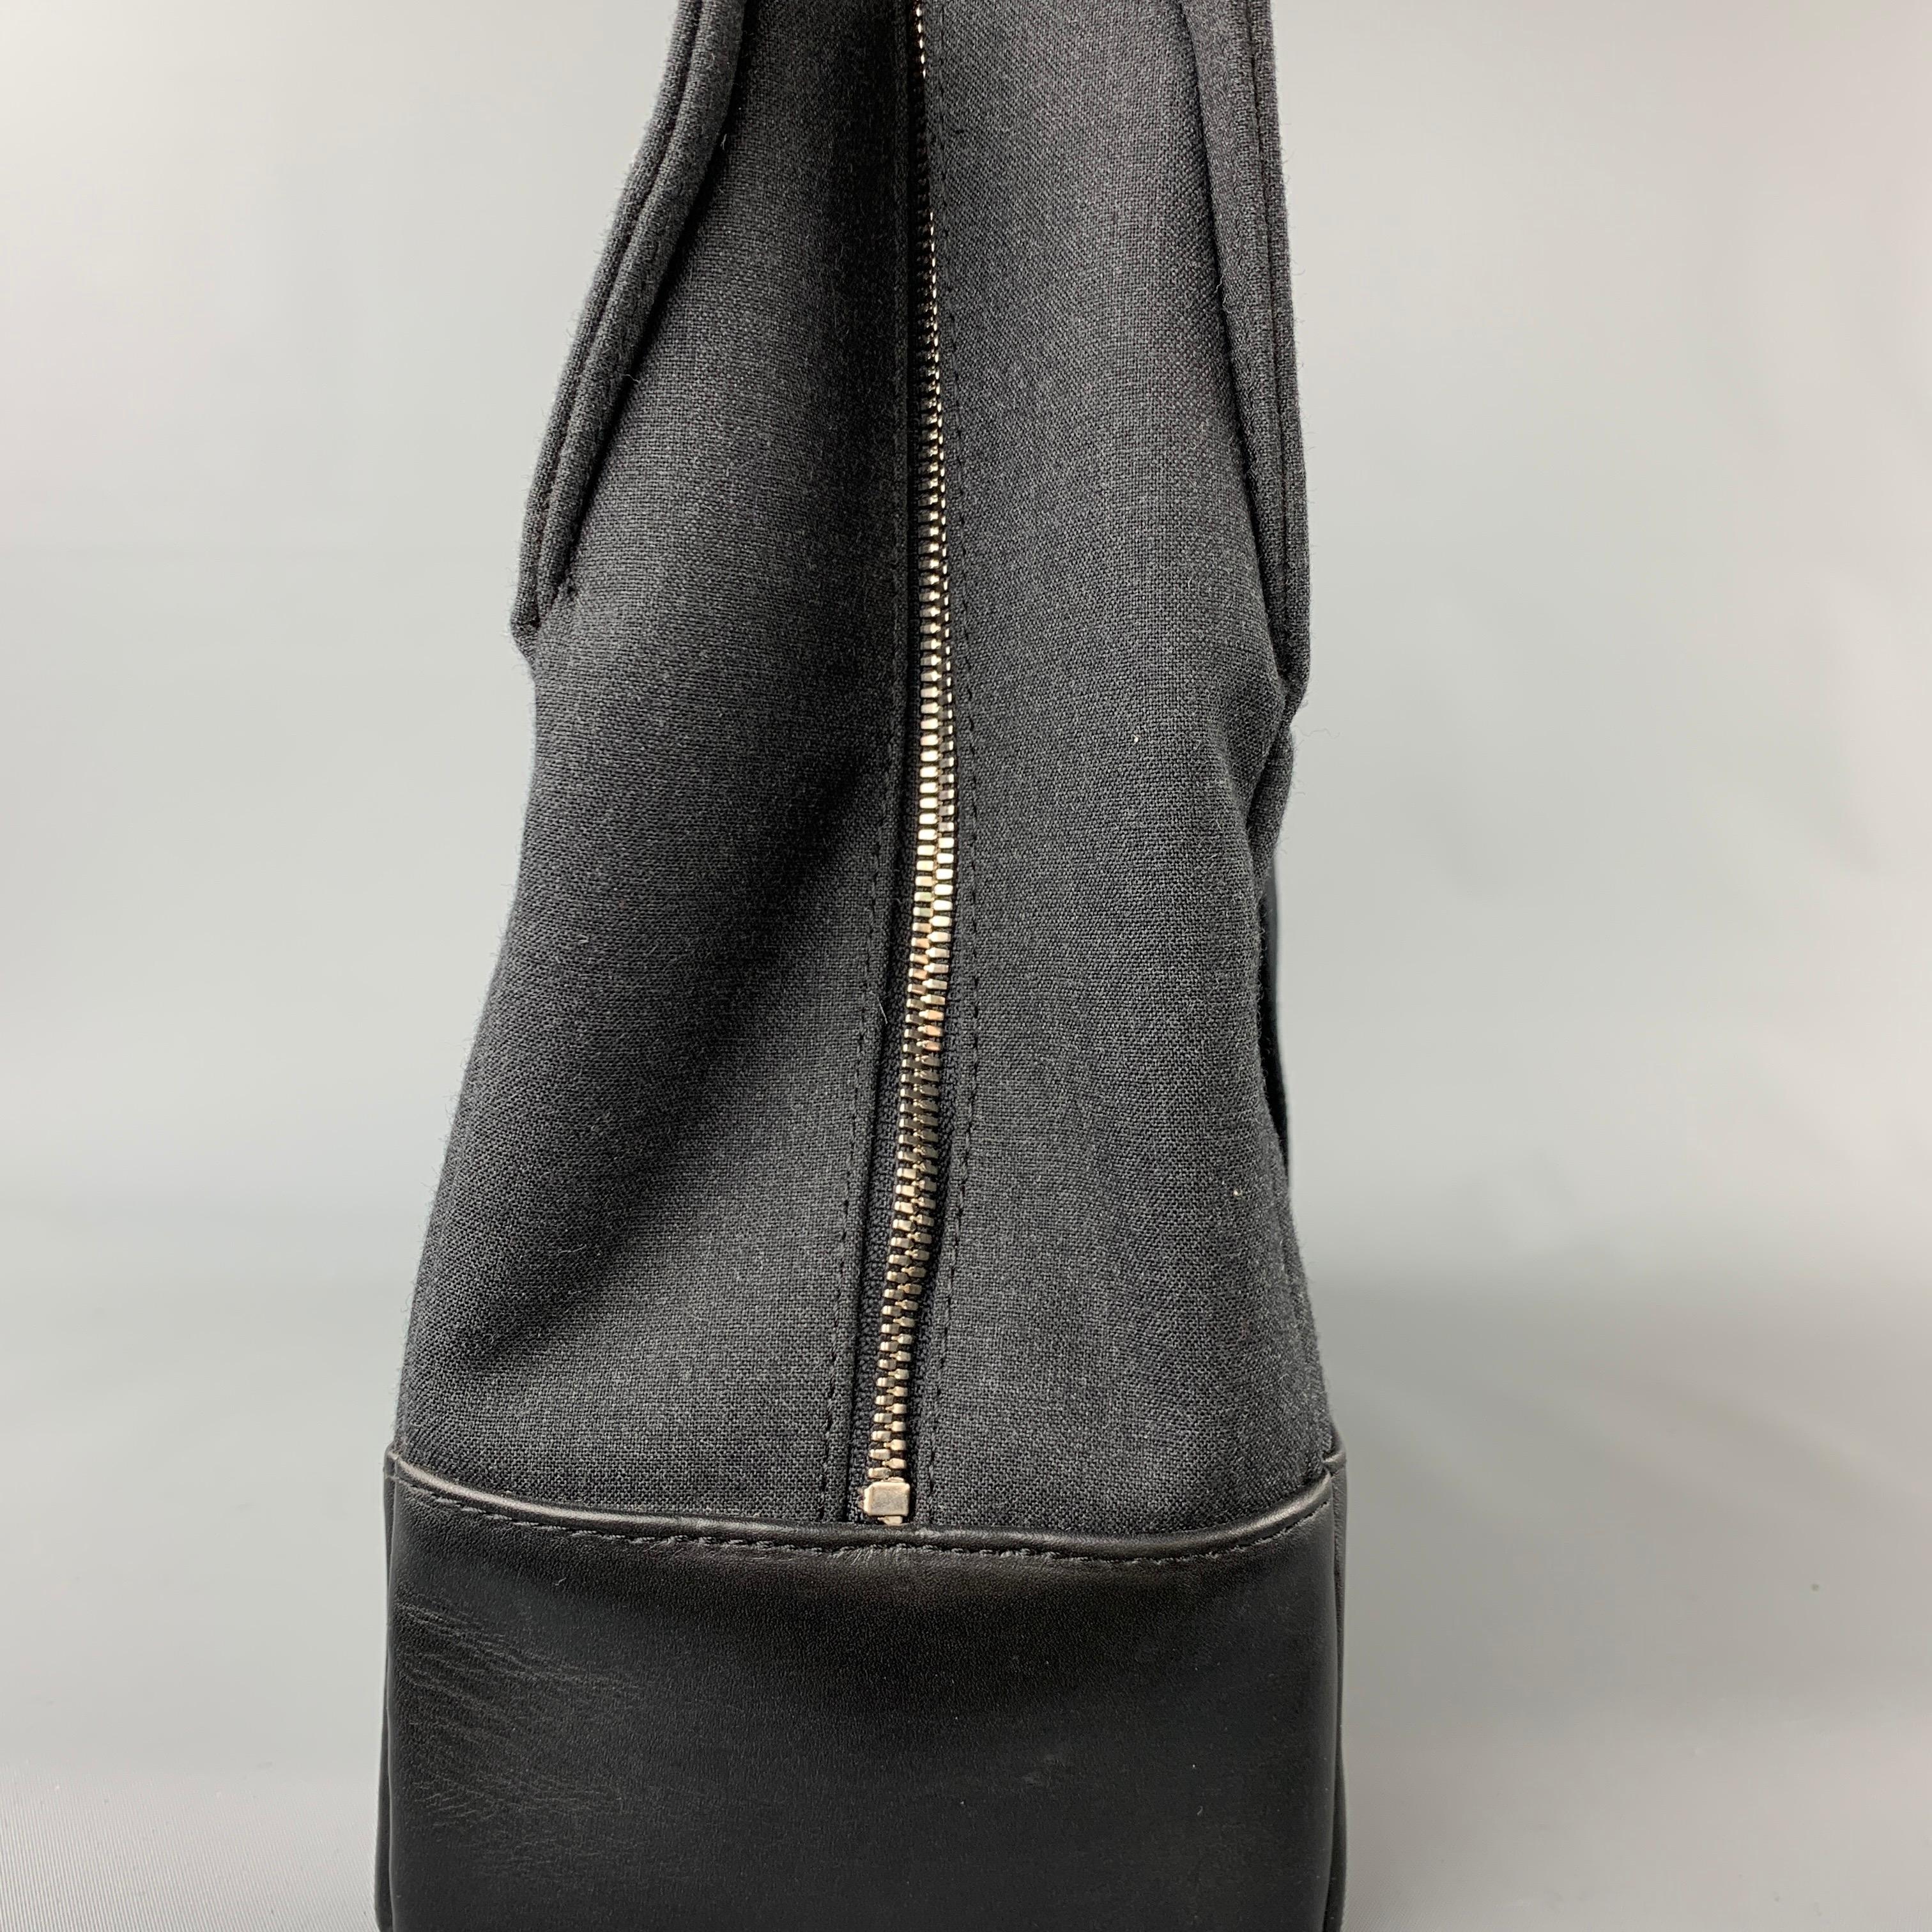 JACK SADE laptop bag comes in a charcoal canvas with a black leather trim featuring a shoulder strap, top handles, inner slots, silver tone hardware, and a zip up closure. 

Very Good Pre-Owned Condition.

Measurements:

Length: 15.5 in.
Width: 5